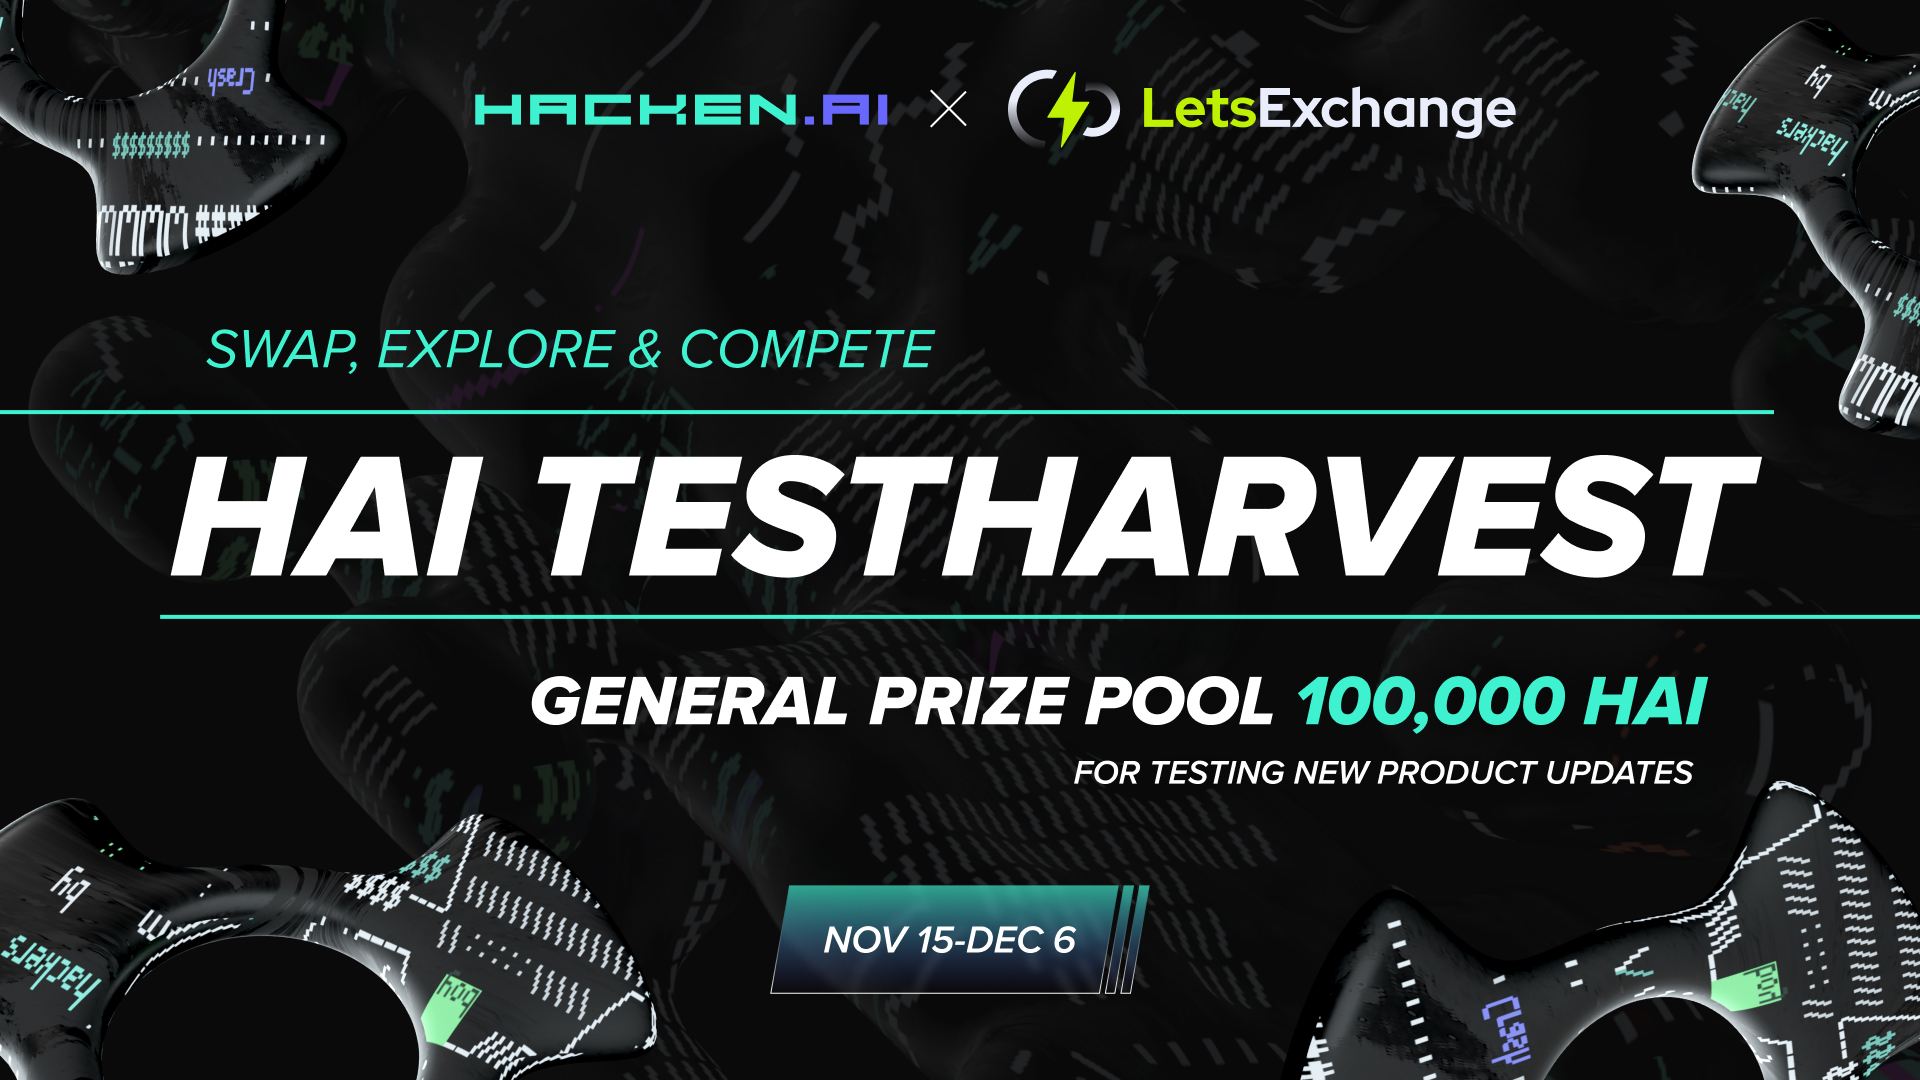 HAI TestHarvest – Swap, Explore & Compete for a Bigger Pool Share